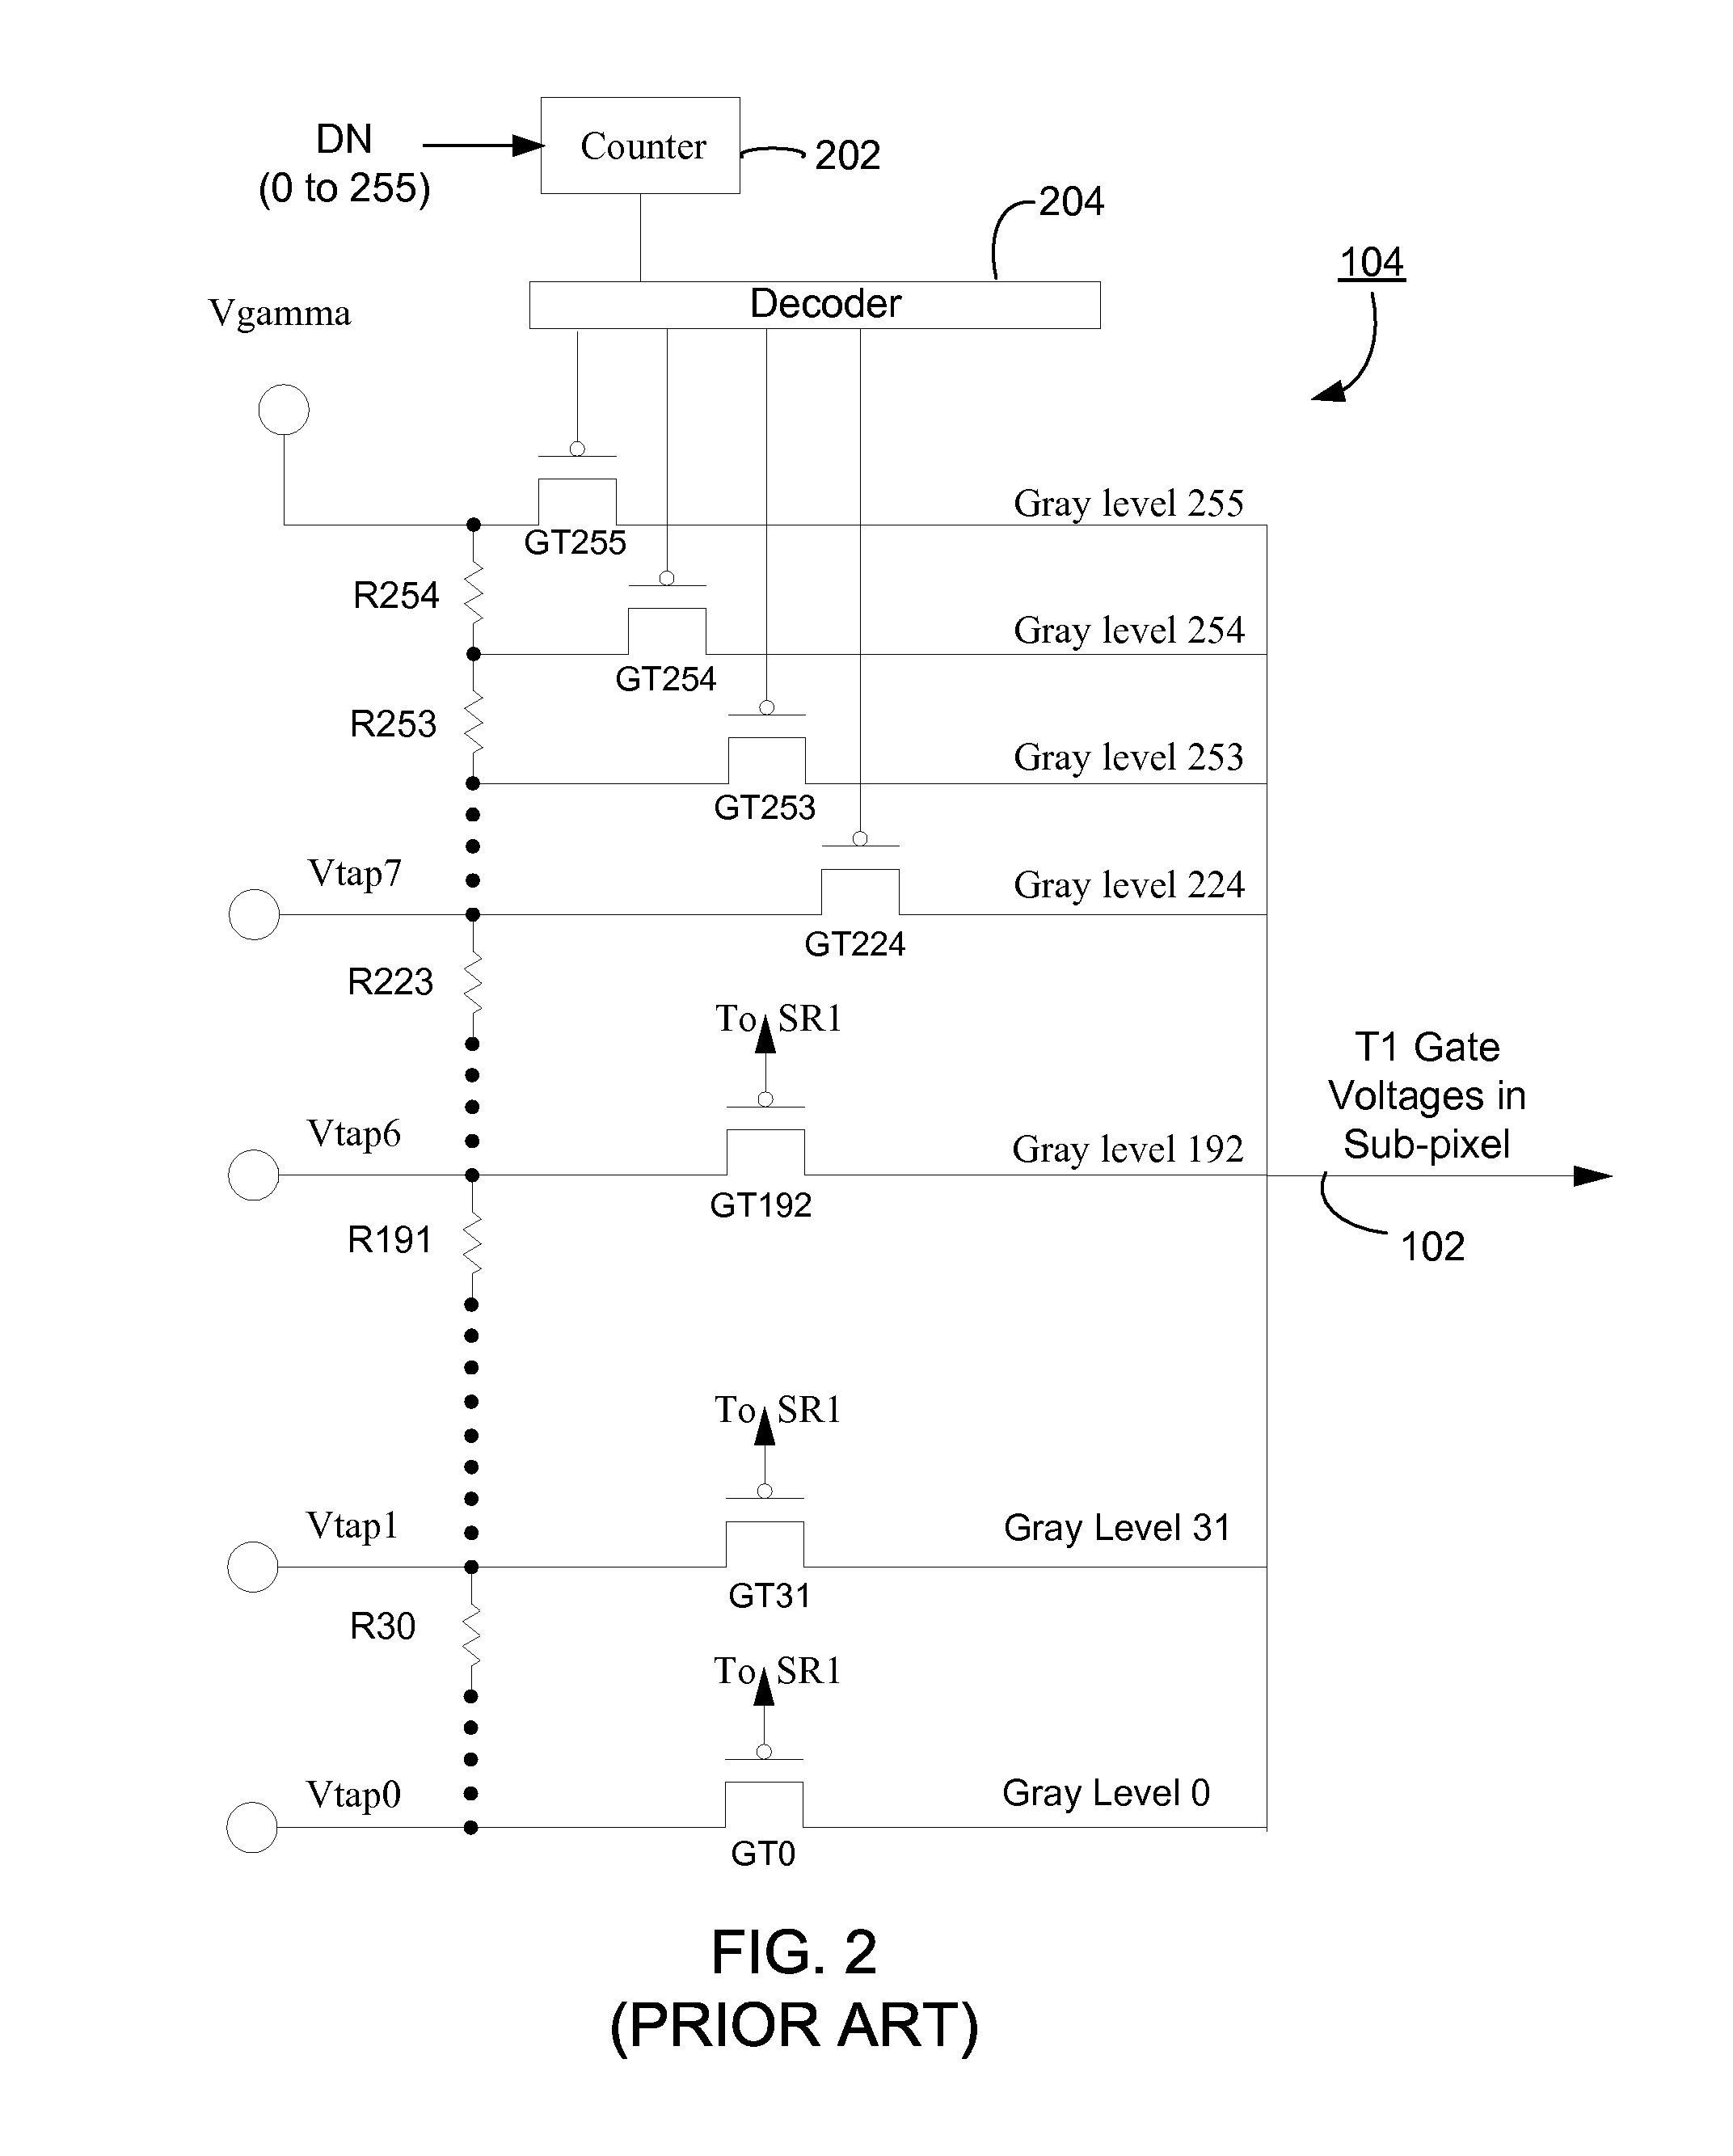 Emission control in aged active matrix OLED display using voltage ratio or current ratio with temperature compensation